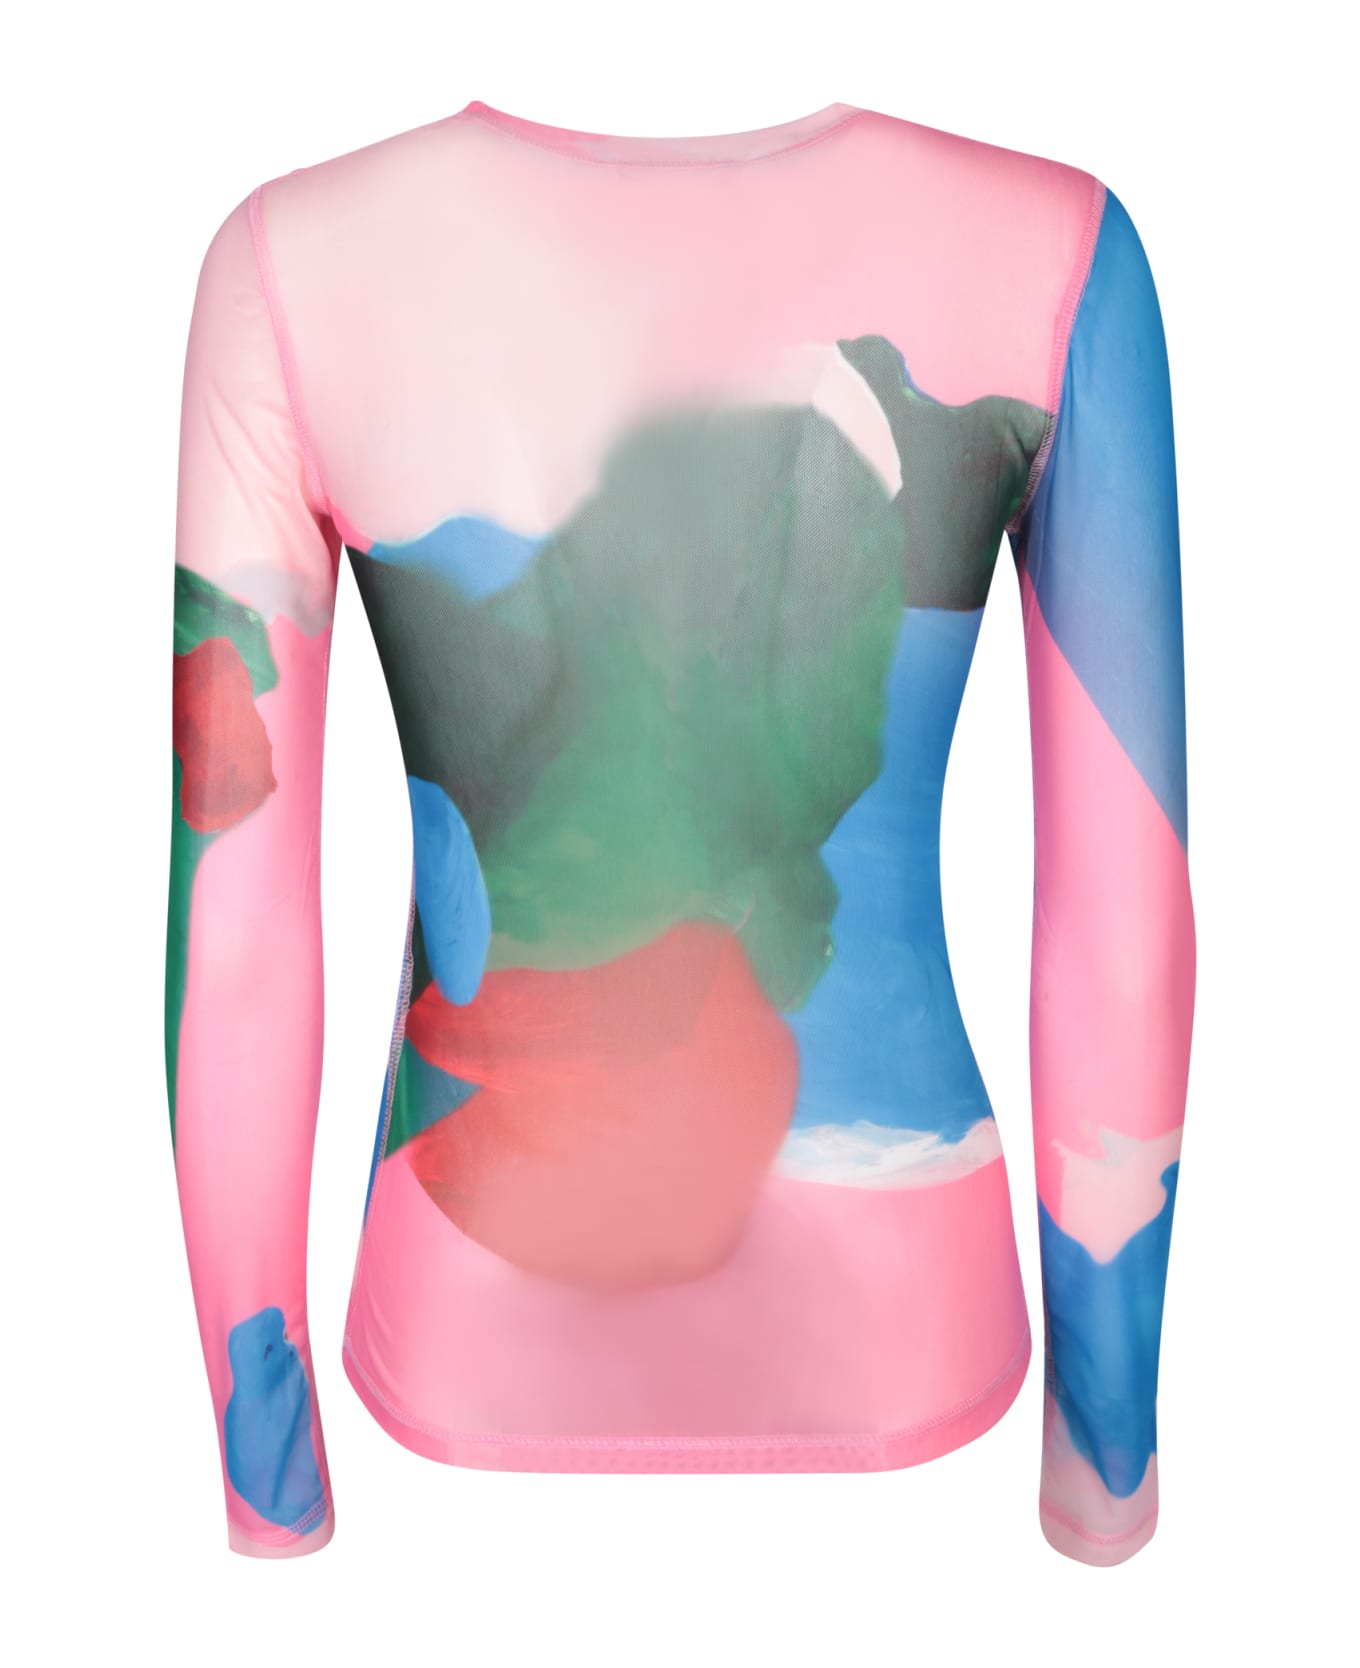 J.W. Anderson Abstract Pattern Print T-shirt - Pink/multi